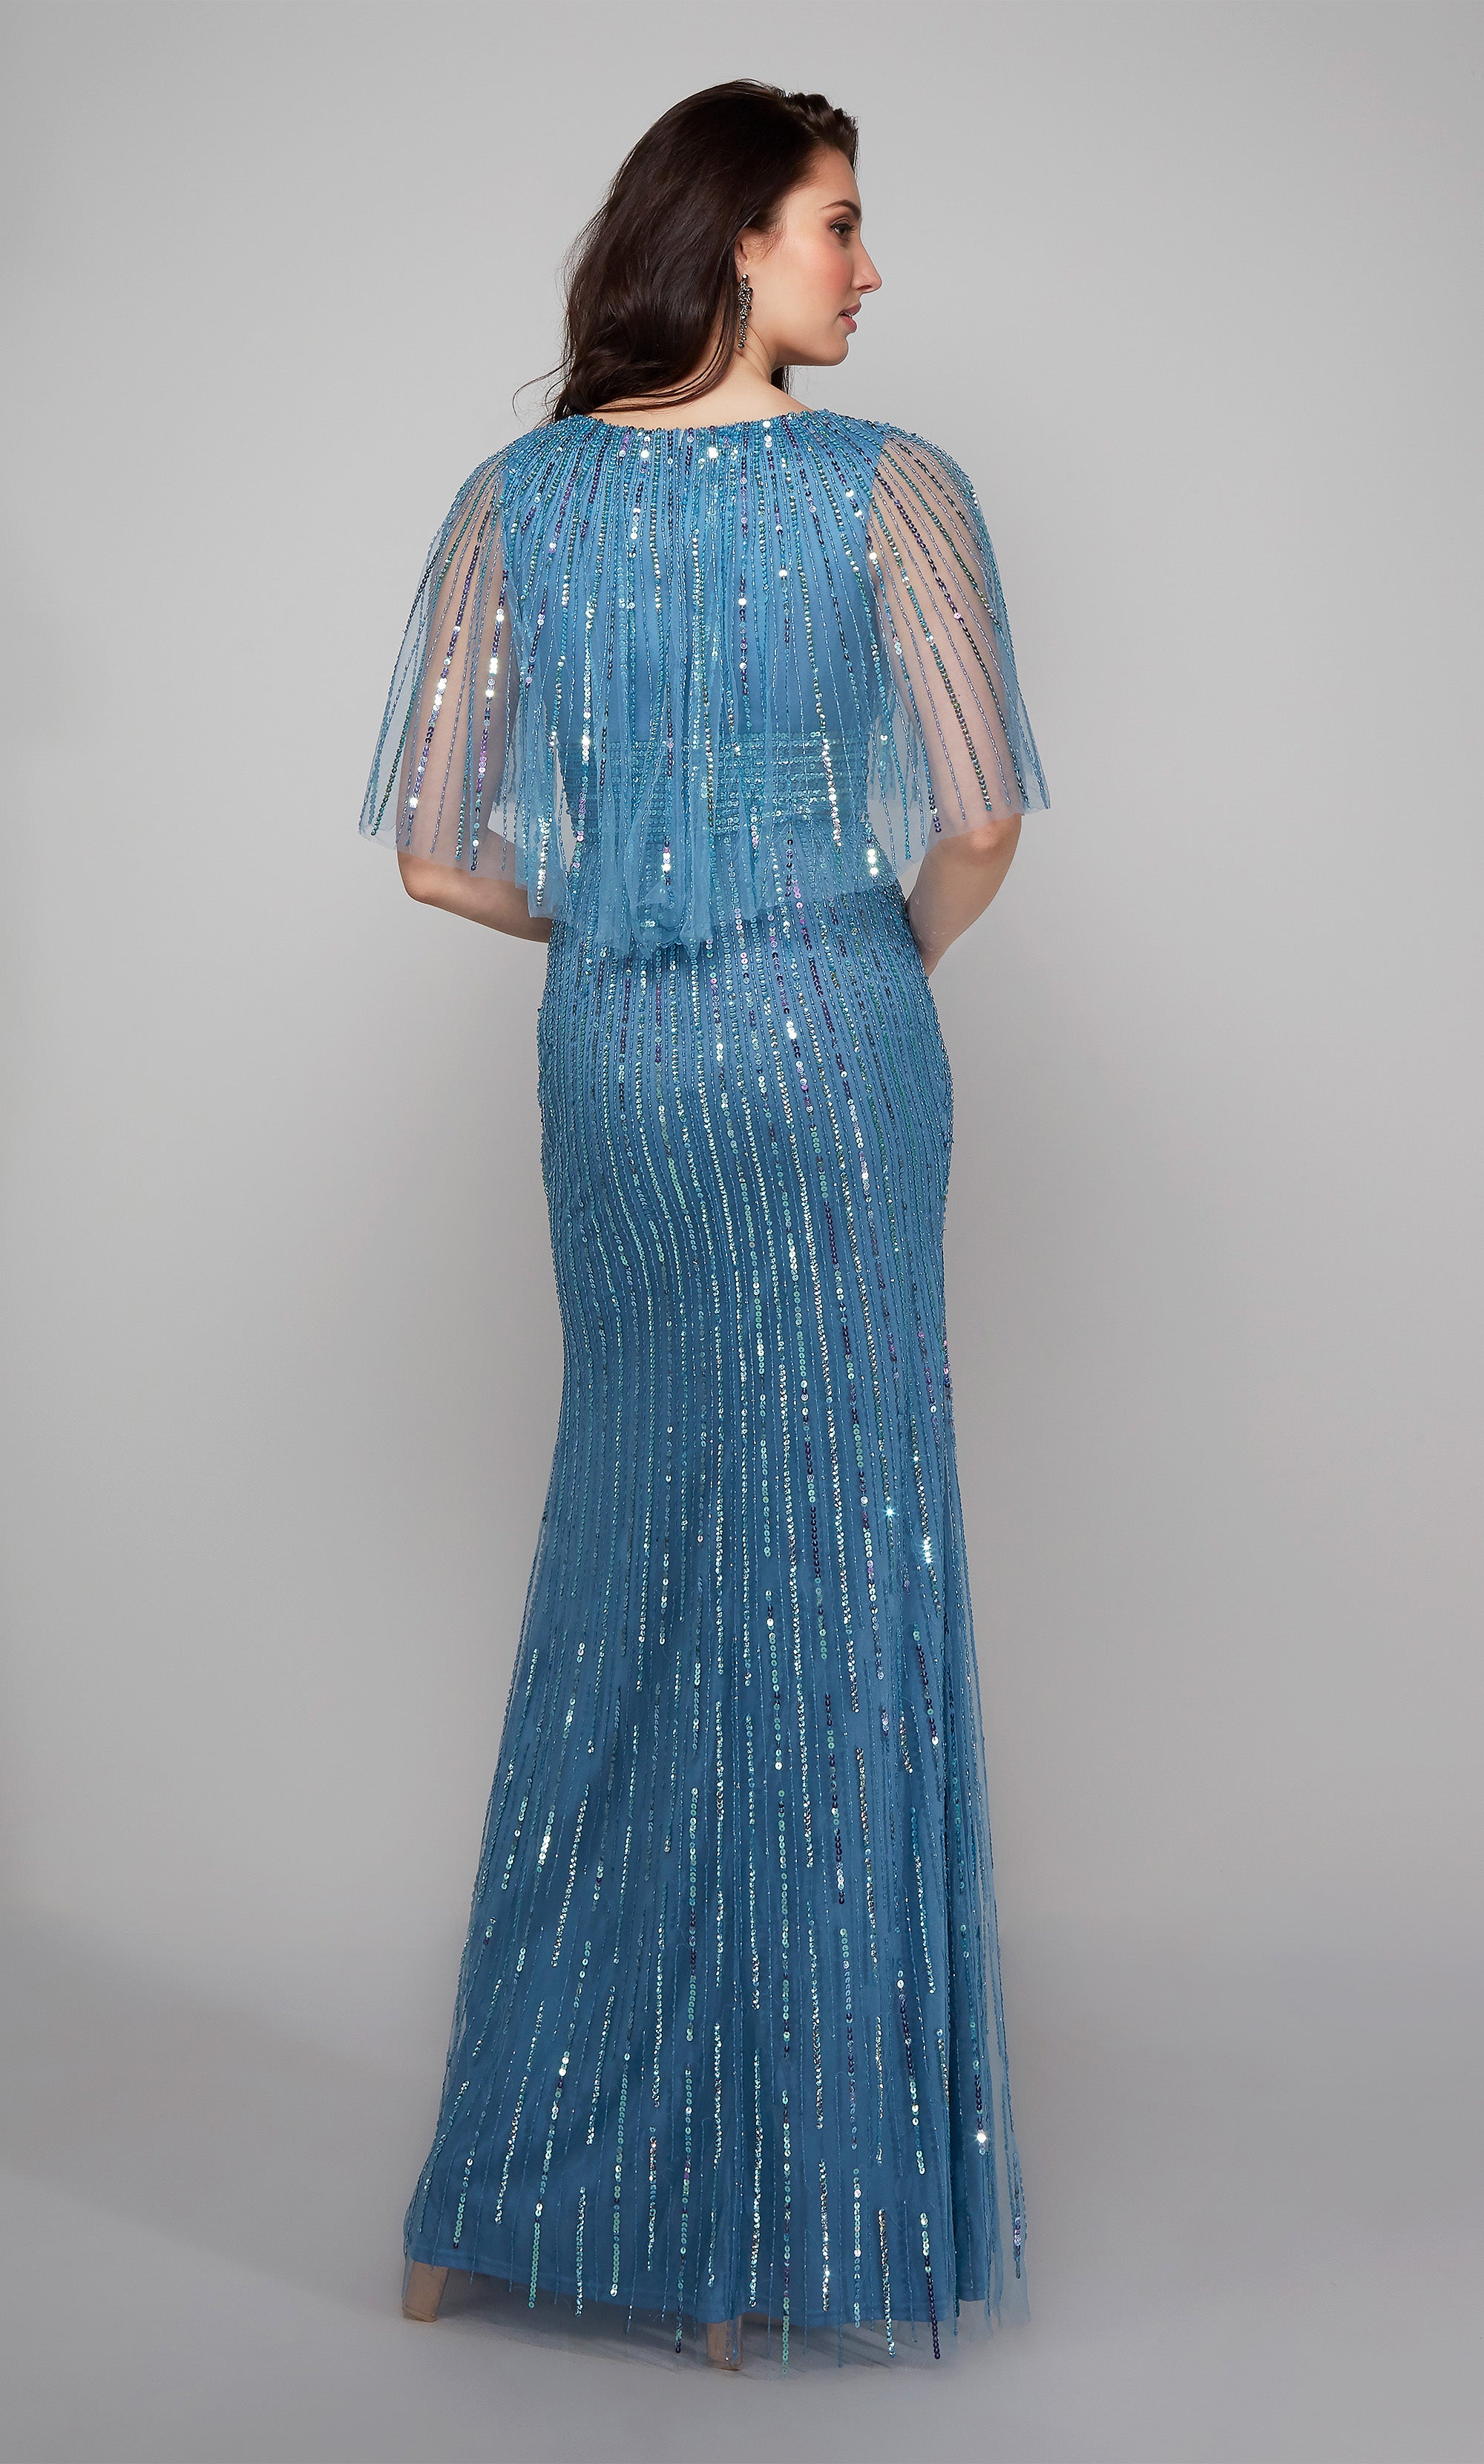 Embellished evening gown with a V neck and sheer capelet in blue. Color-SWATCH_27599__NIAGARA-BLUE